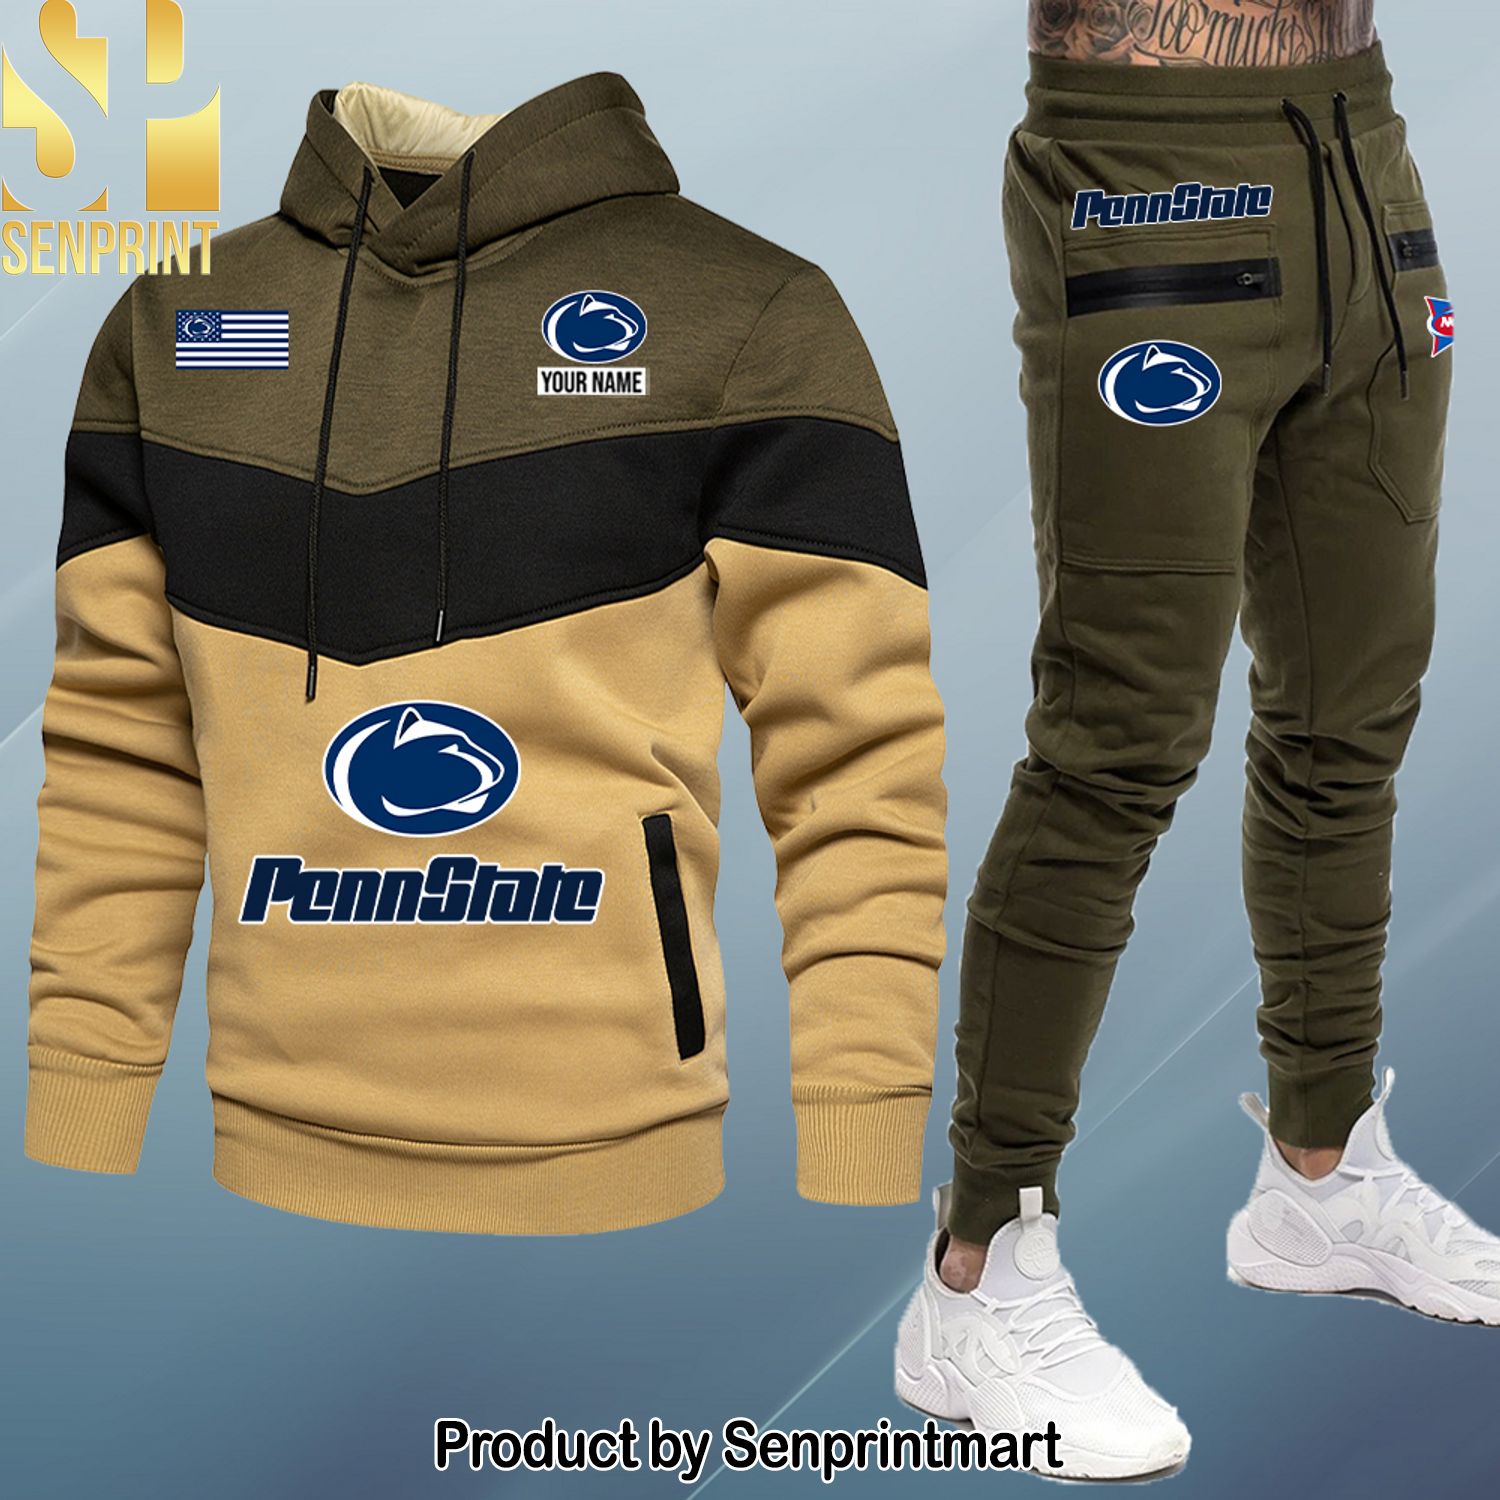 Penn State Nittany Lions All Over Printed Shirt and Pants